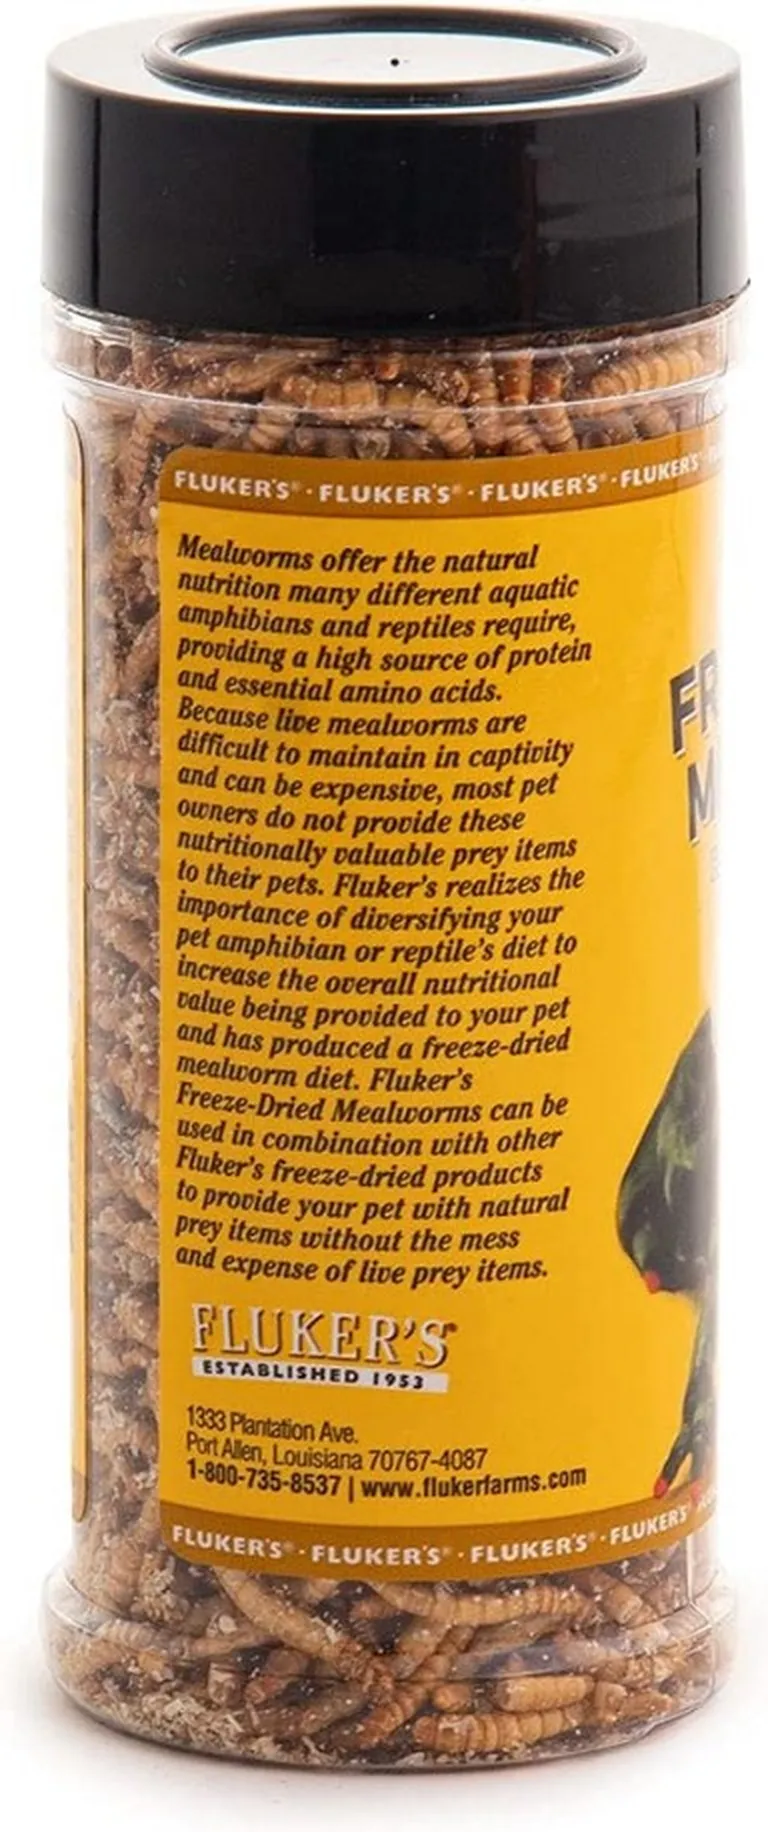 Flukers Freeze-Dried Mealworms for Reptiles, Birds, Tropical Fish, Amphibians and Hedgehogs Photo 3